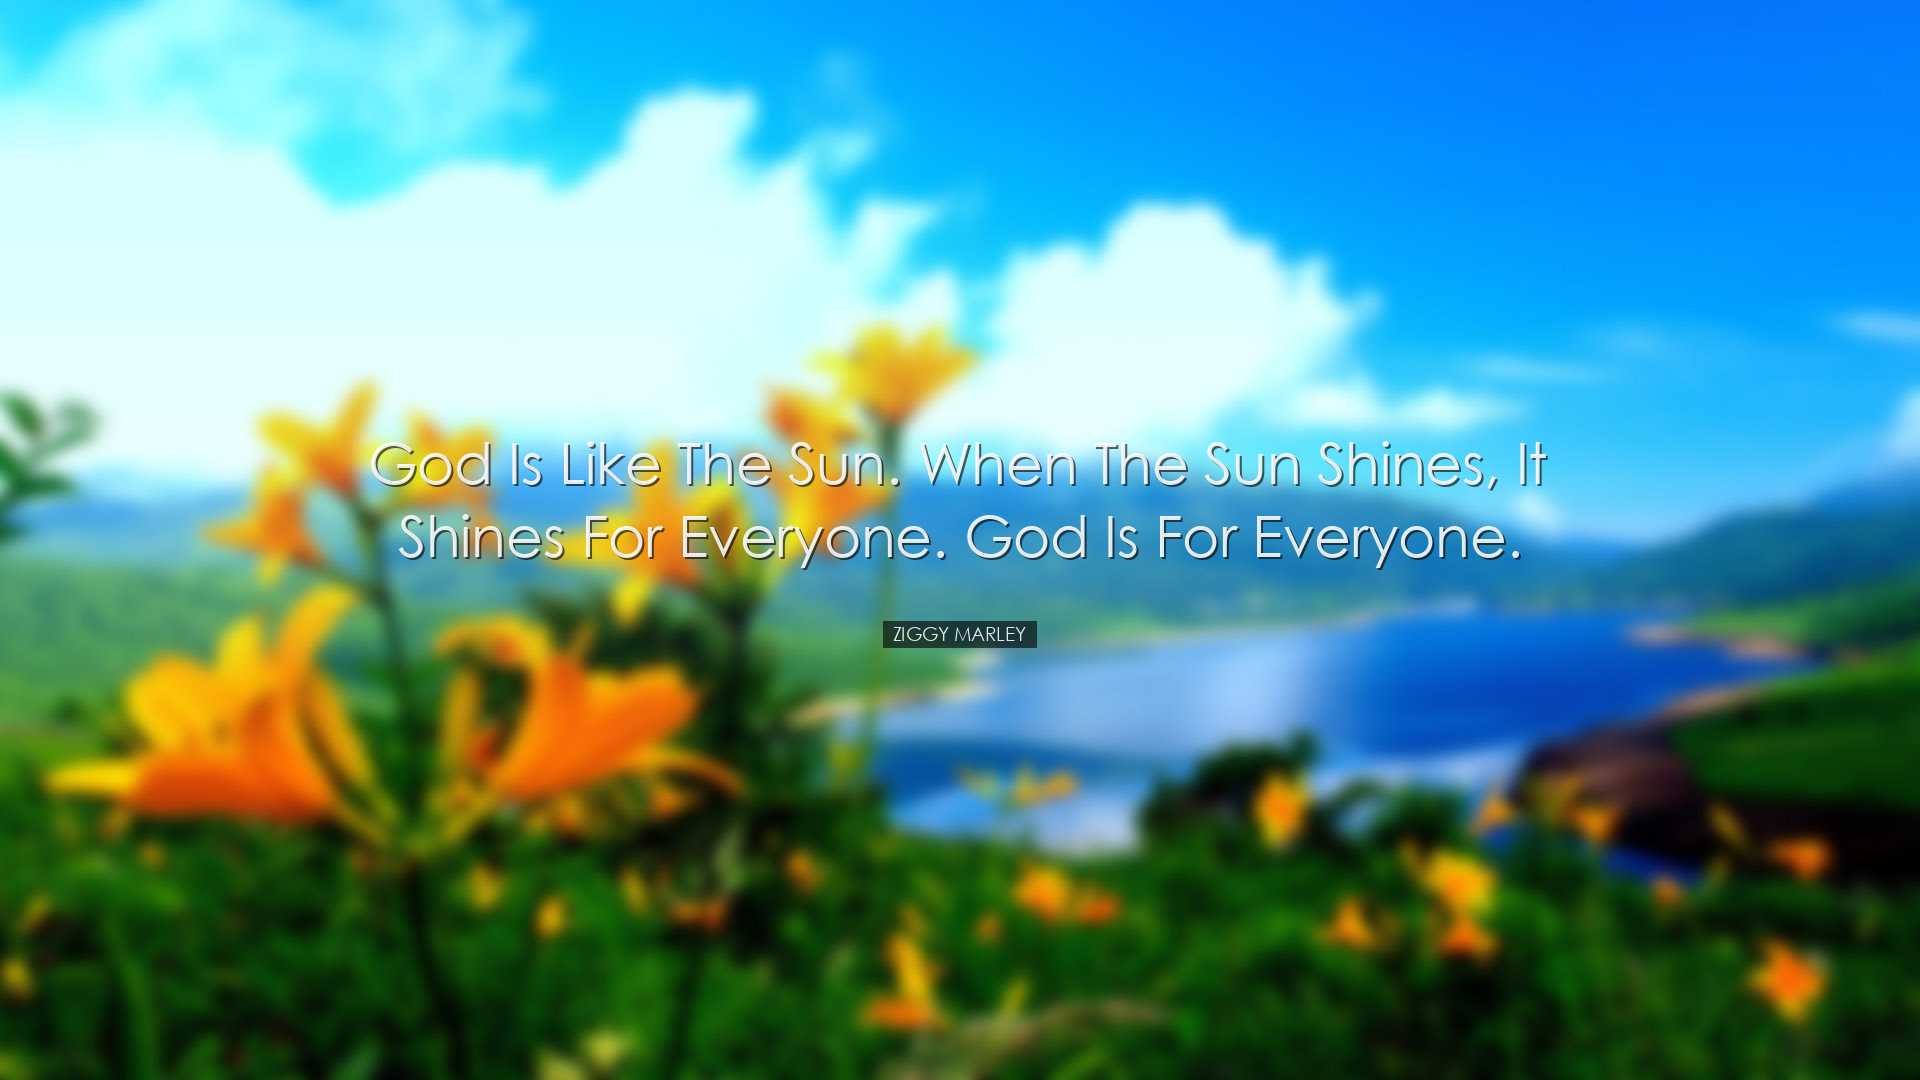 God is like the sun. When the sun shines, it shines for everyone.